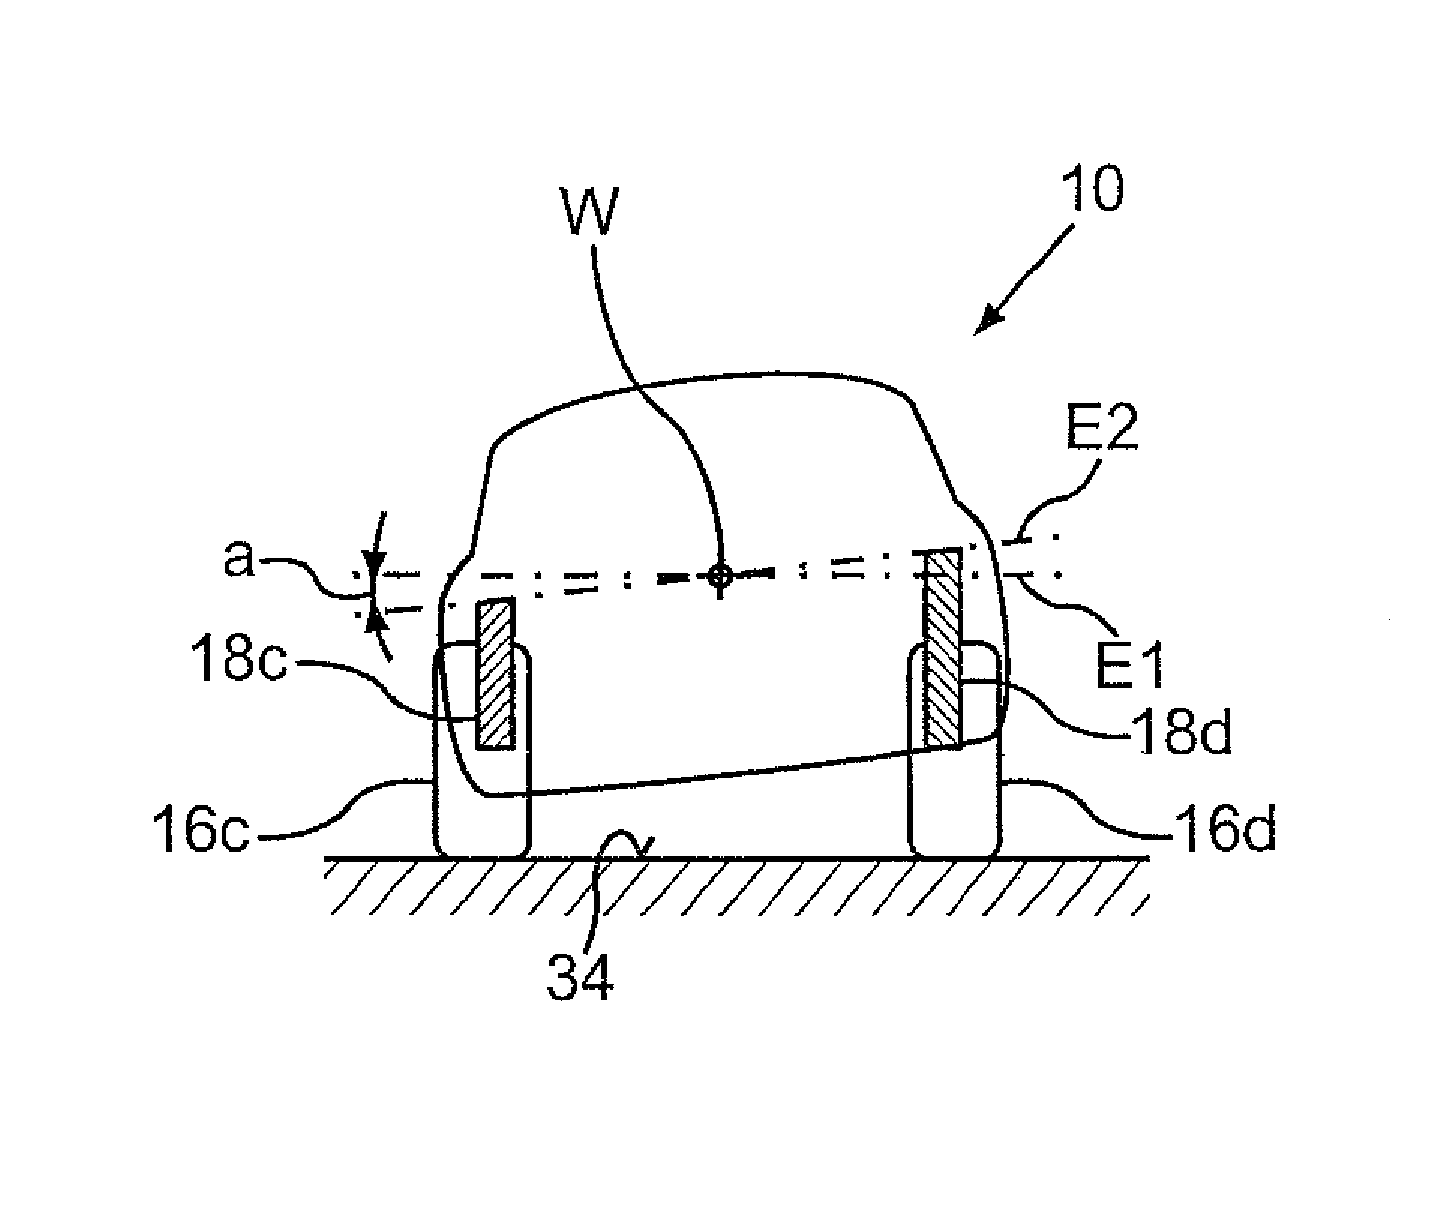 Method and apparatus for affecting cornering performance of a motor vehicle, and a motor vehicle